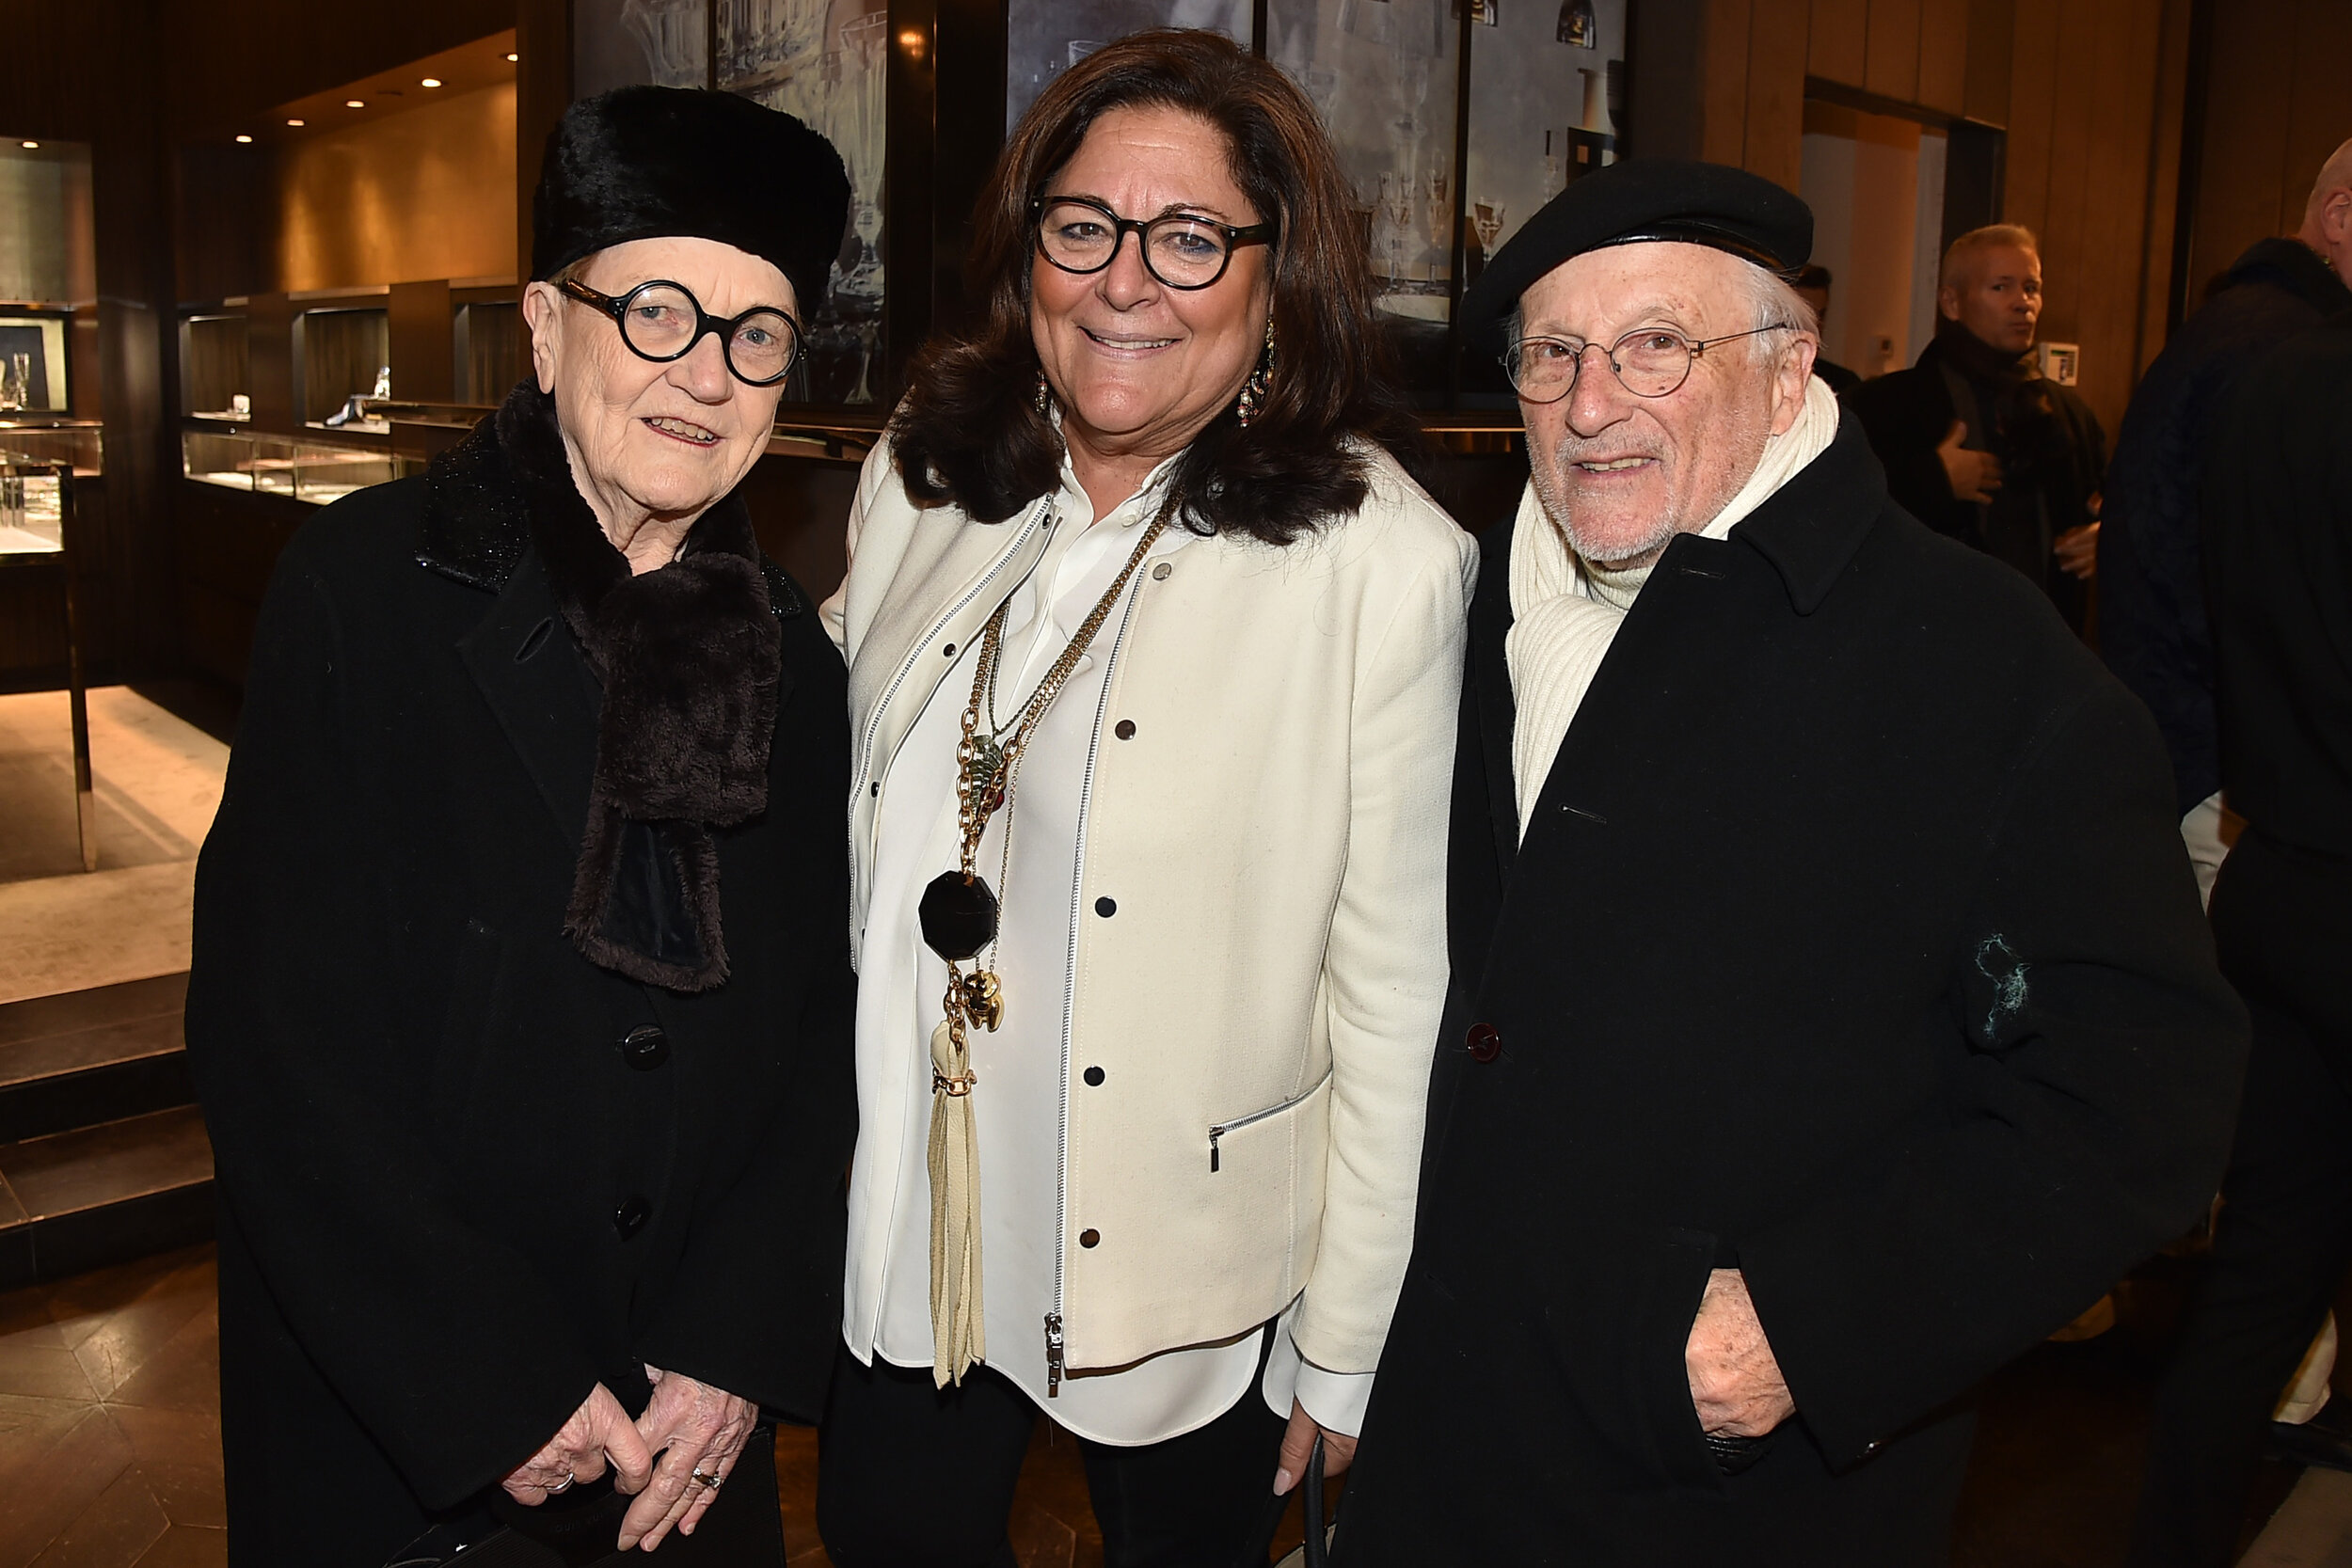 Marylou with fashion legends Fern Mallis and Stan Herman